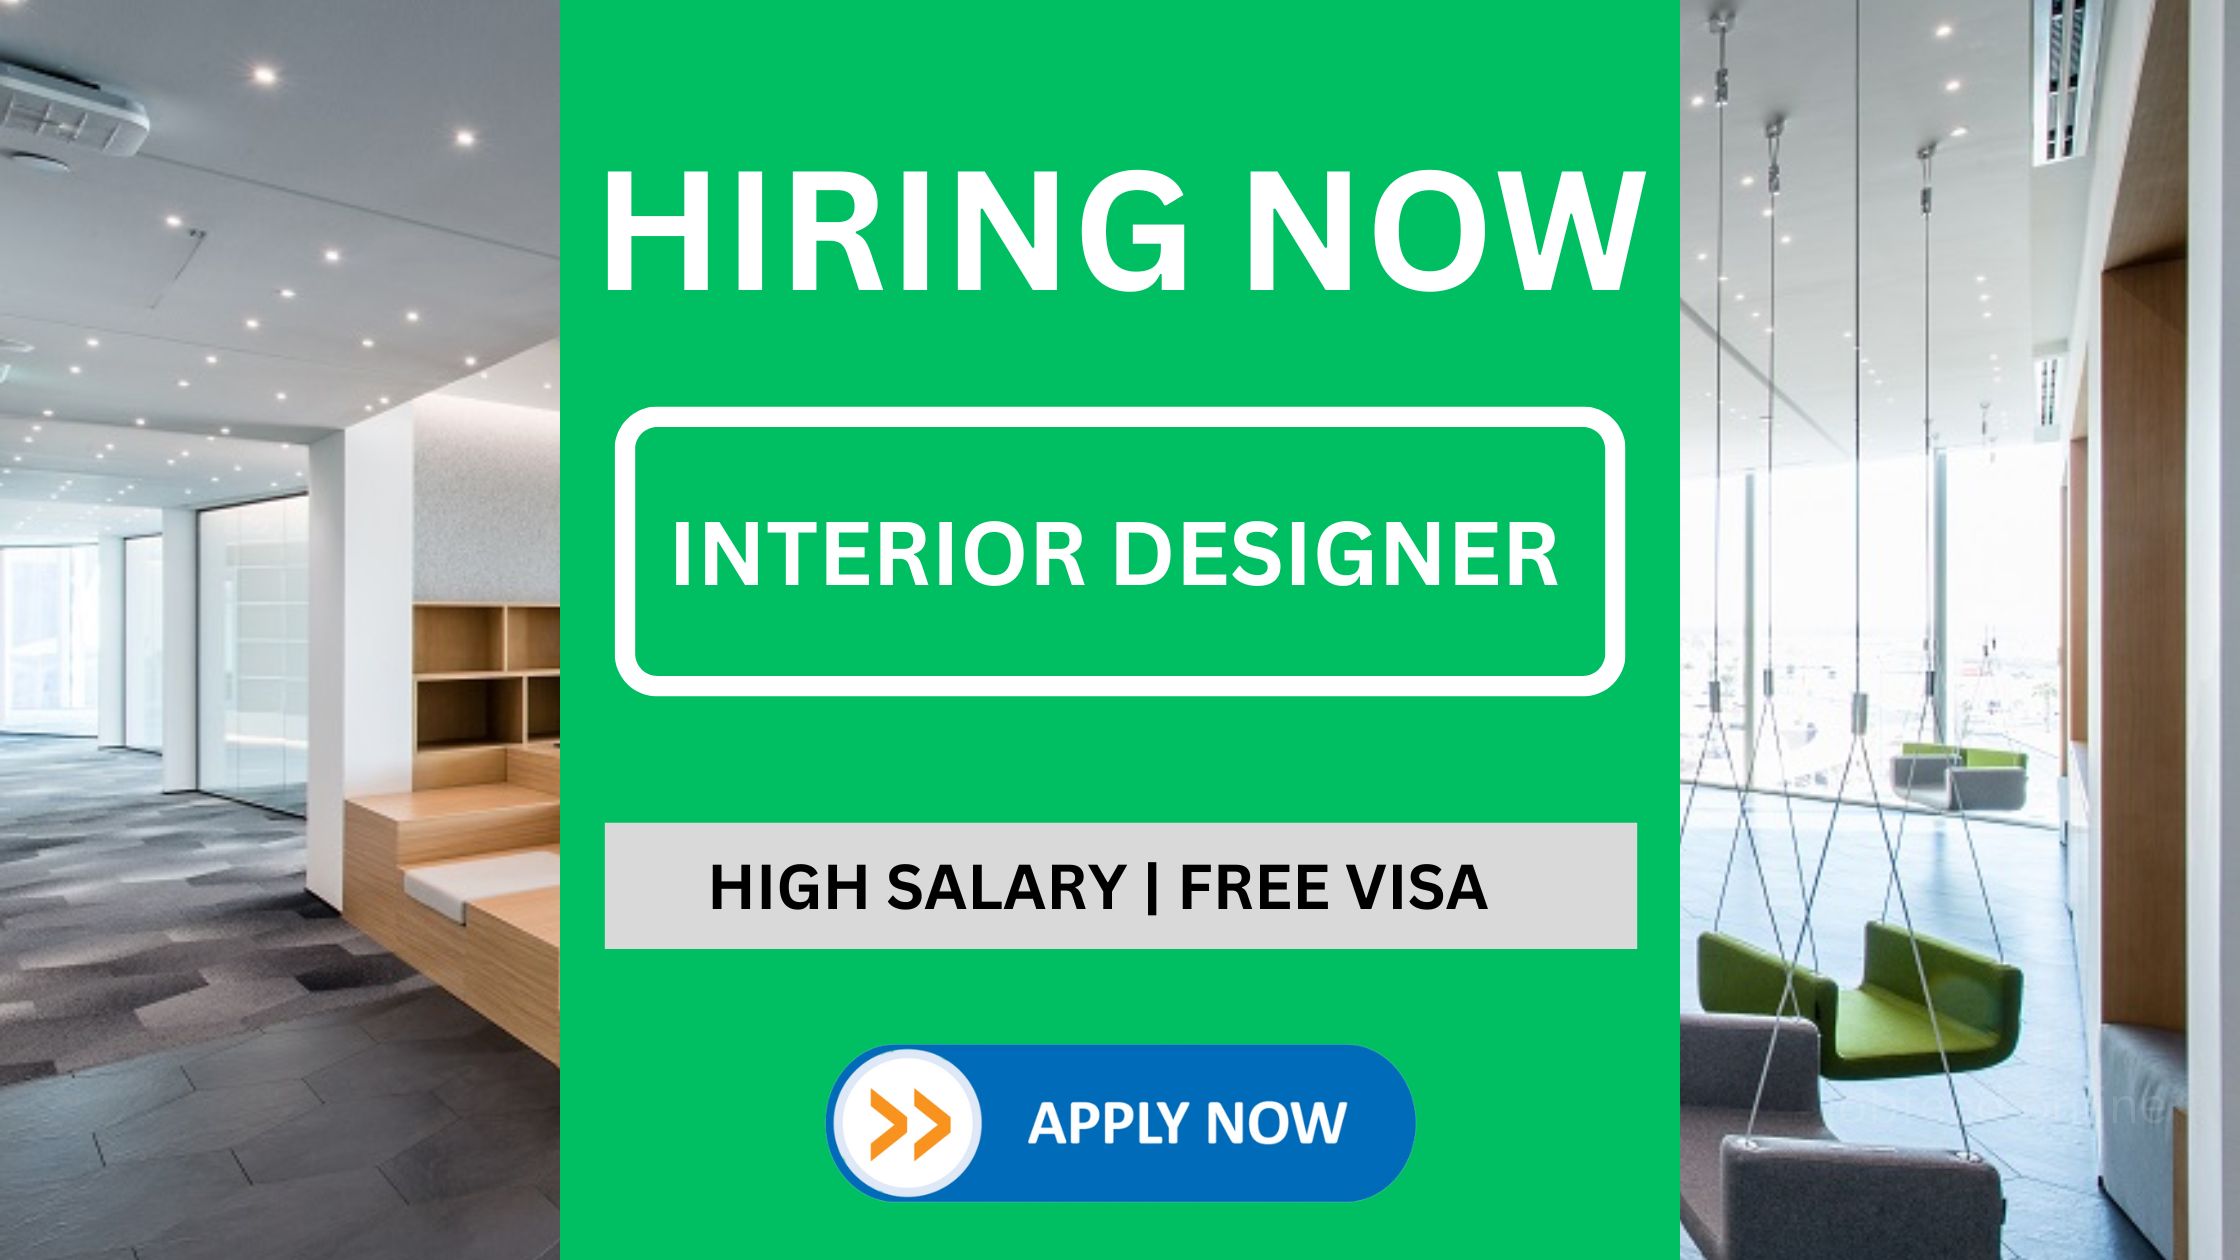 Interior Fitout Vacancies In Dubai | Civil engineering and architectural Jobs